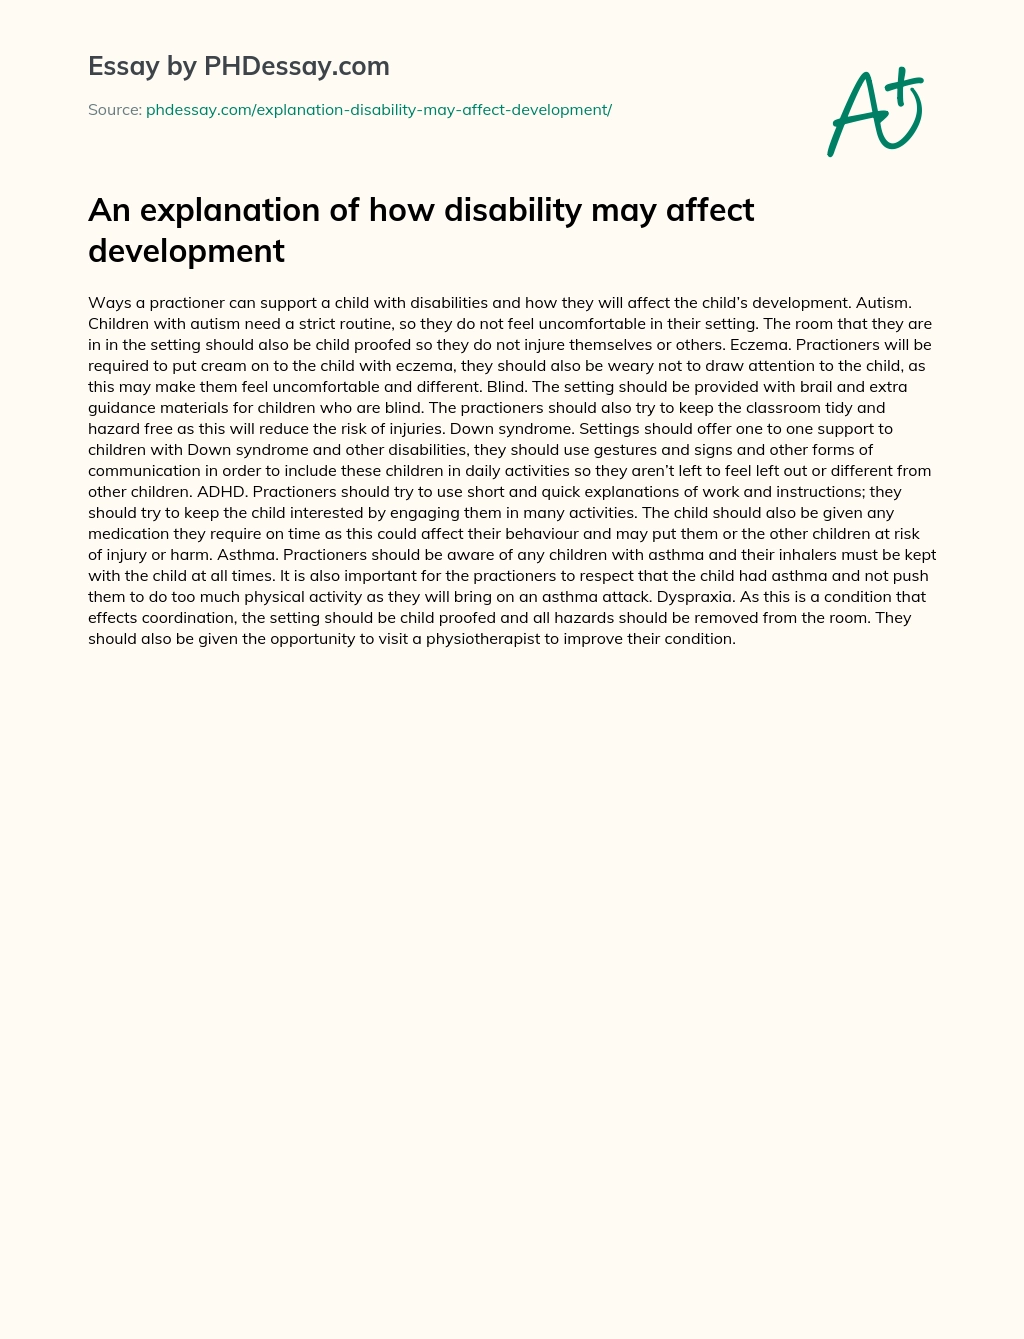 An explanation of how disability may affect development essay